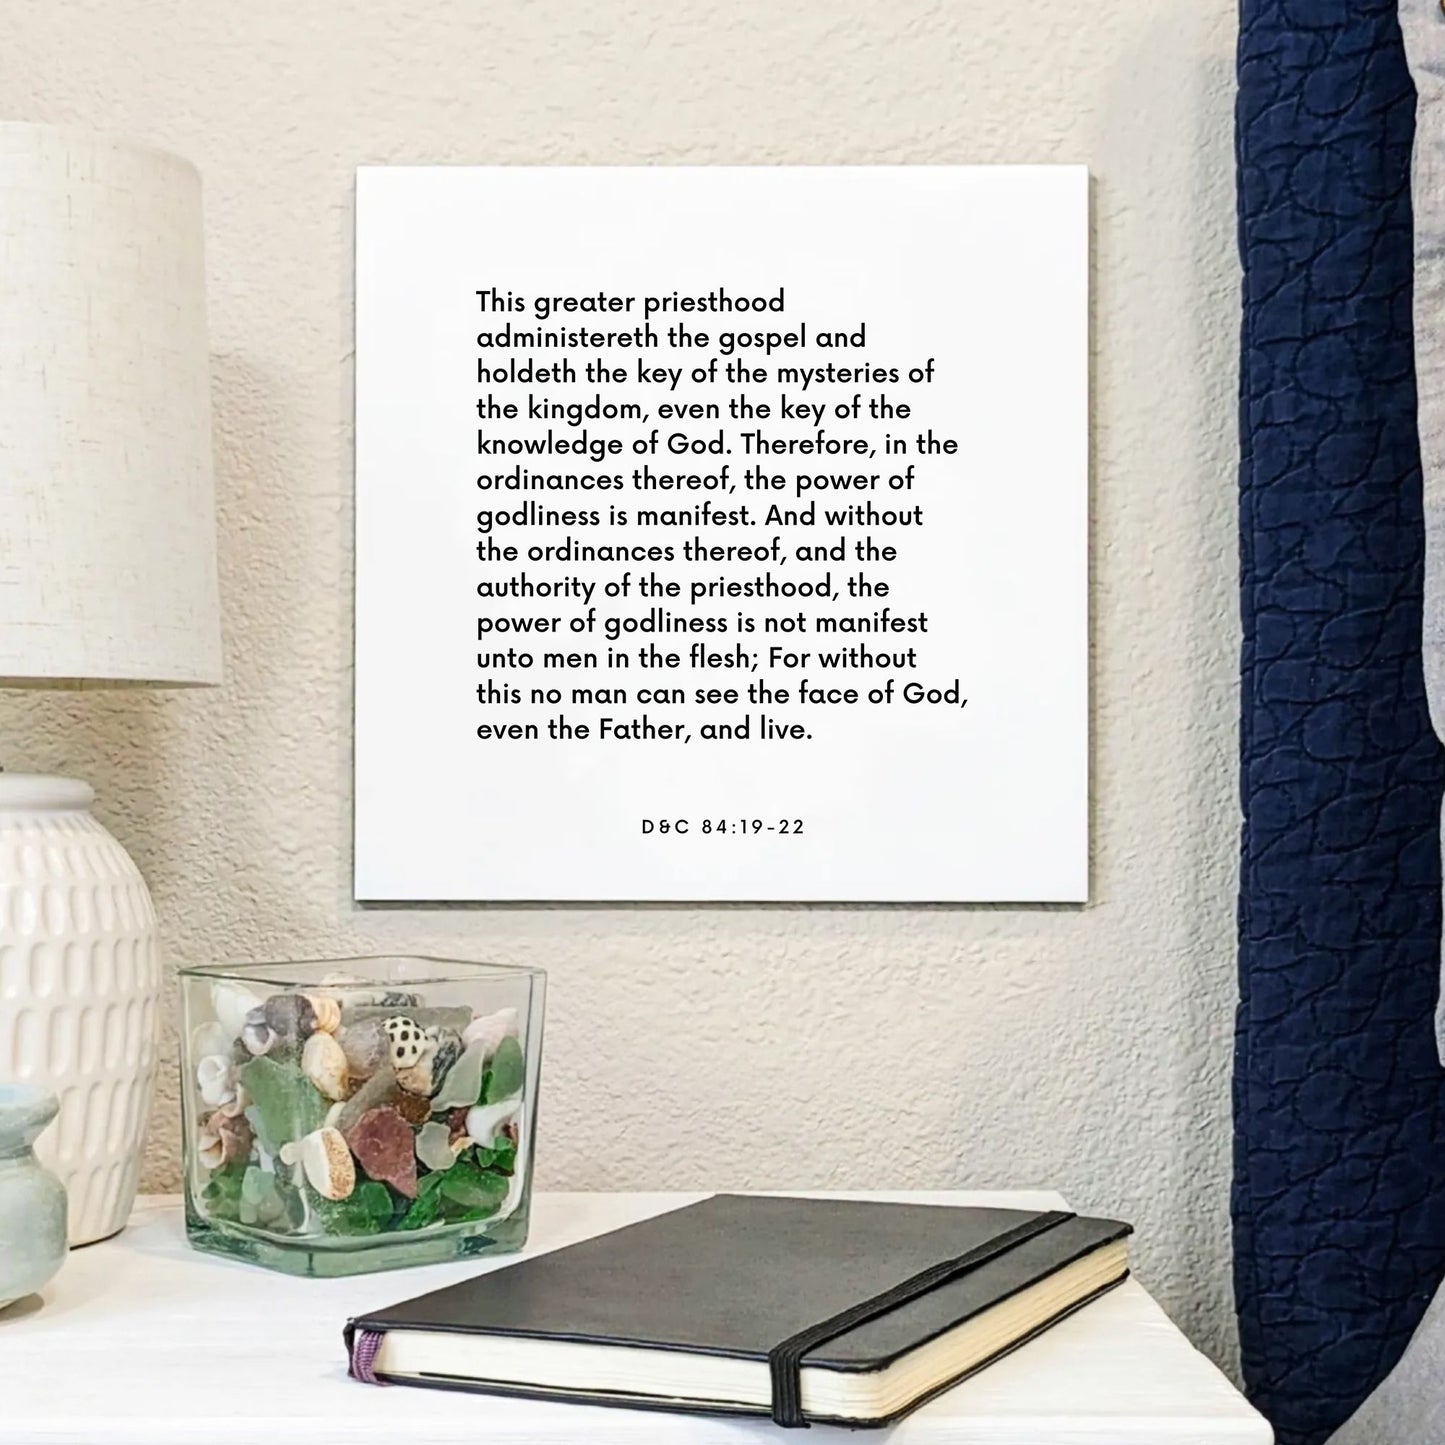 Bedside mouting of the scripture tile for D&C 84:19-22 - "In the ordinances thereof, the power of godliness is manifest"